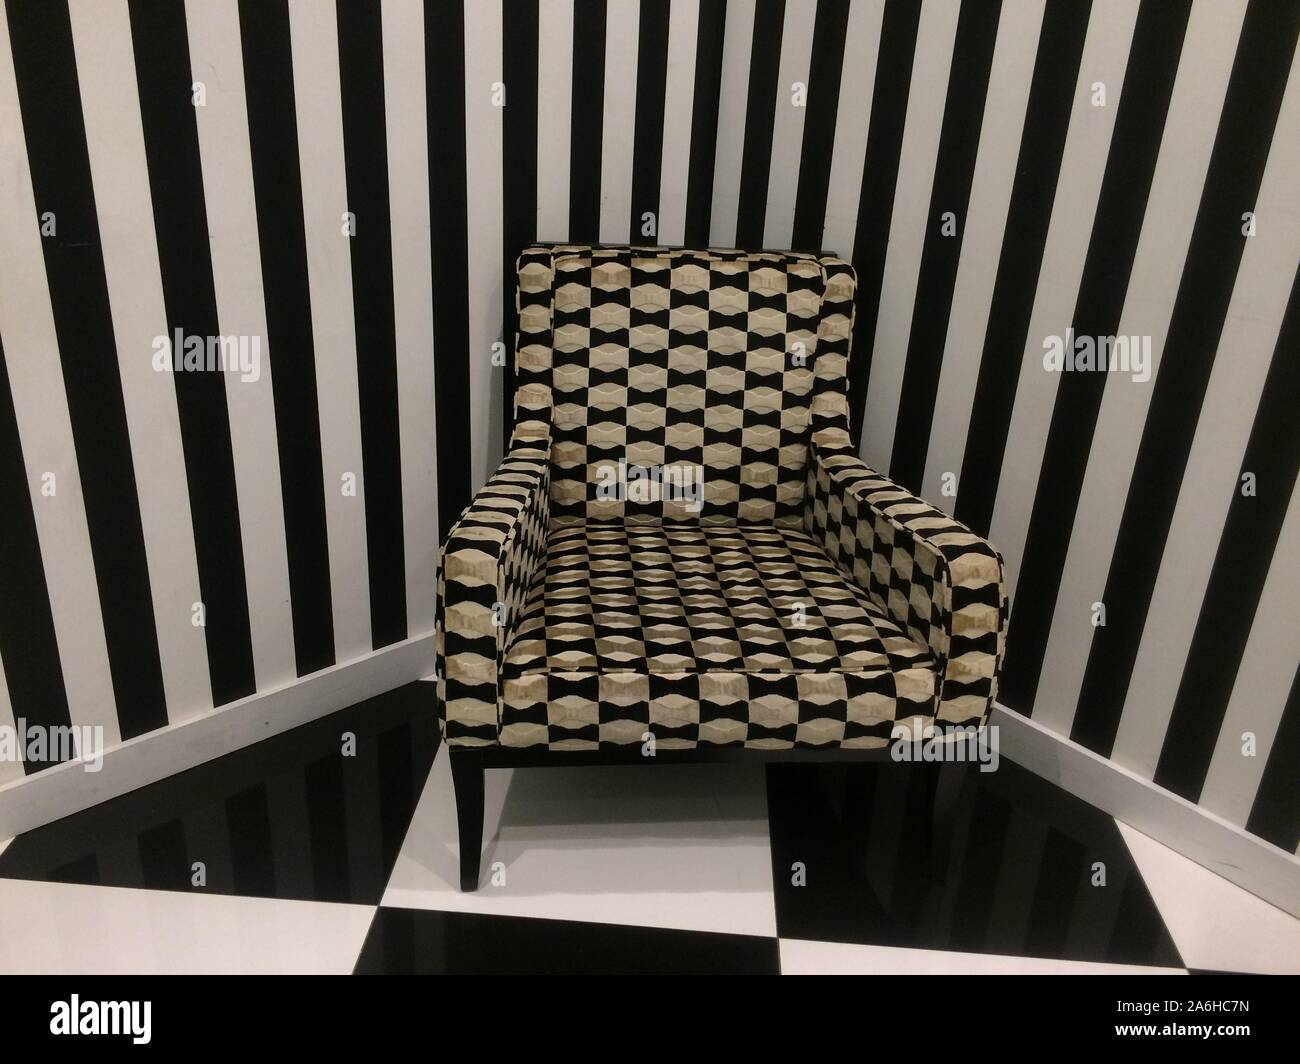 Eccentric modern interior design, monochrome  room with an upholstered corner chair, striped wallpaper and checkboard floor Stock Photo